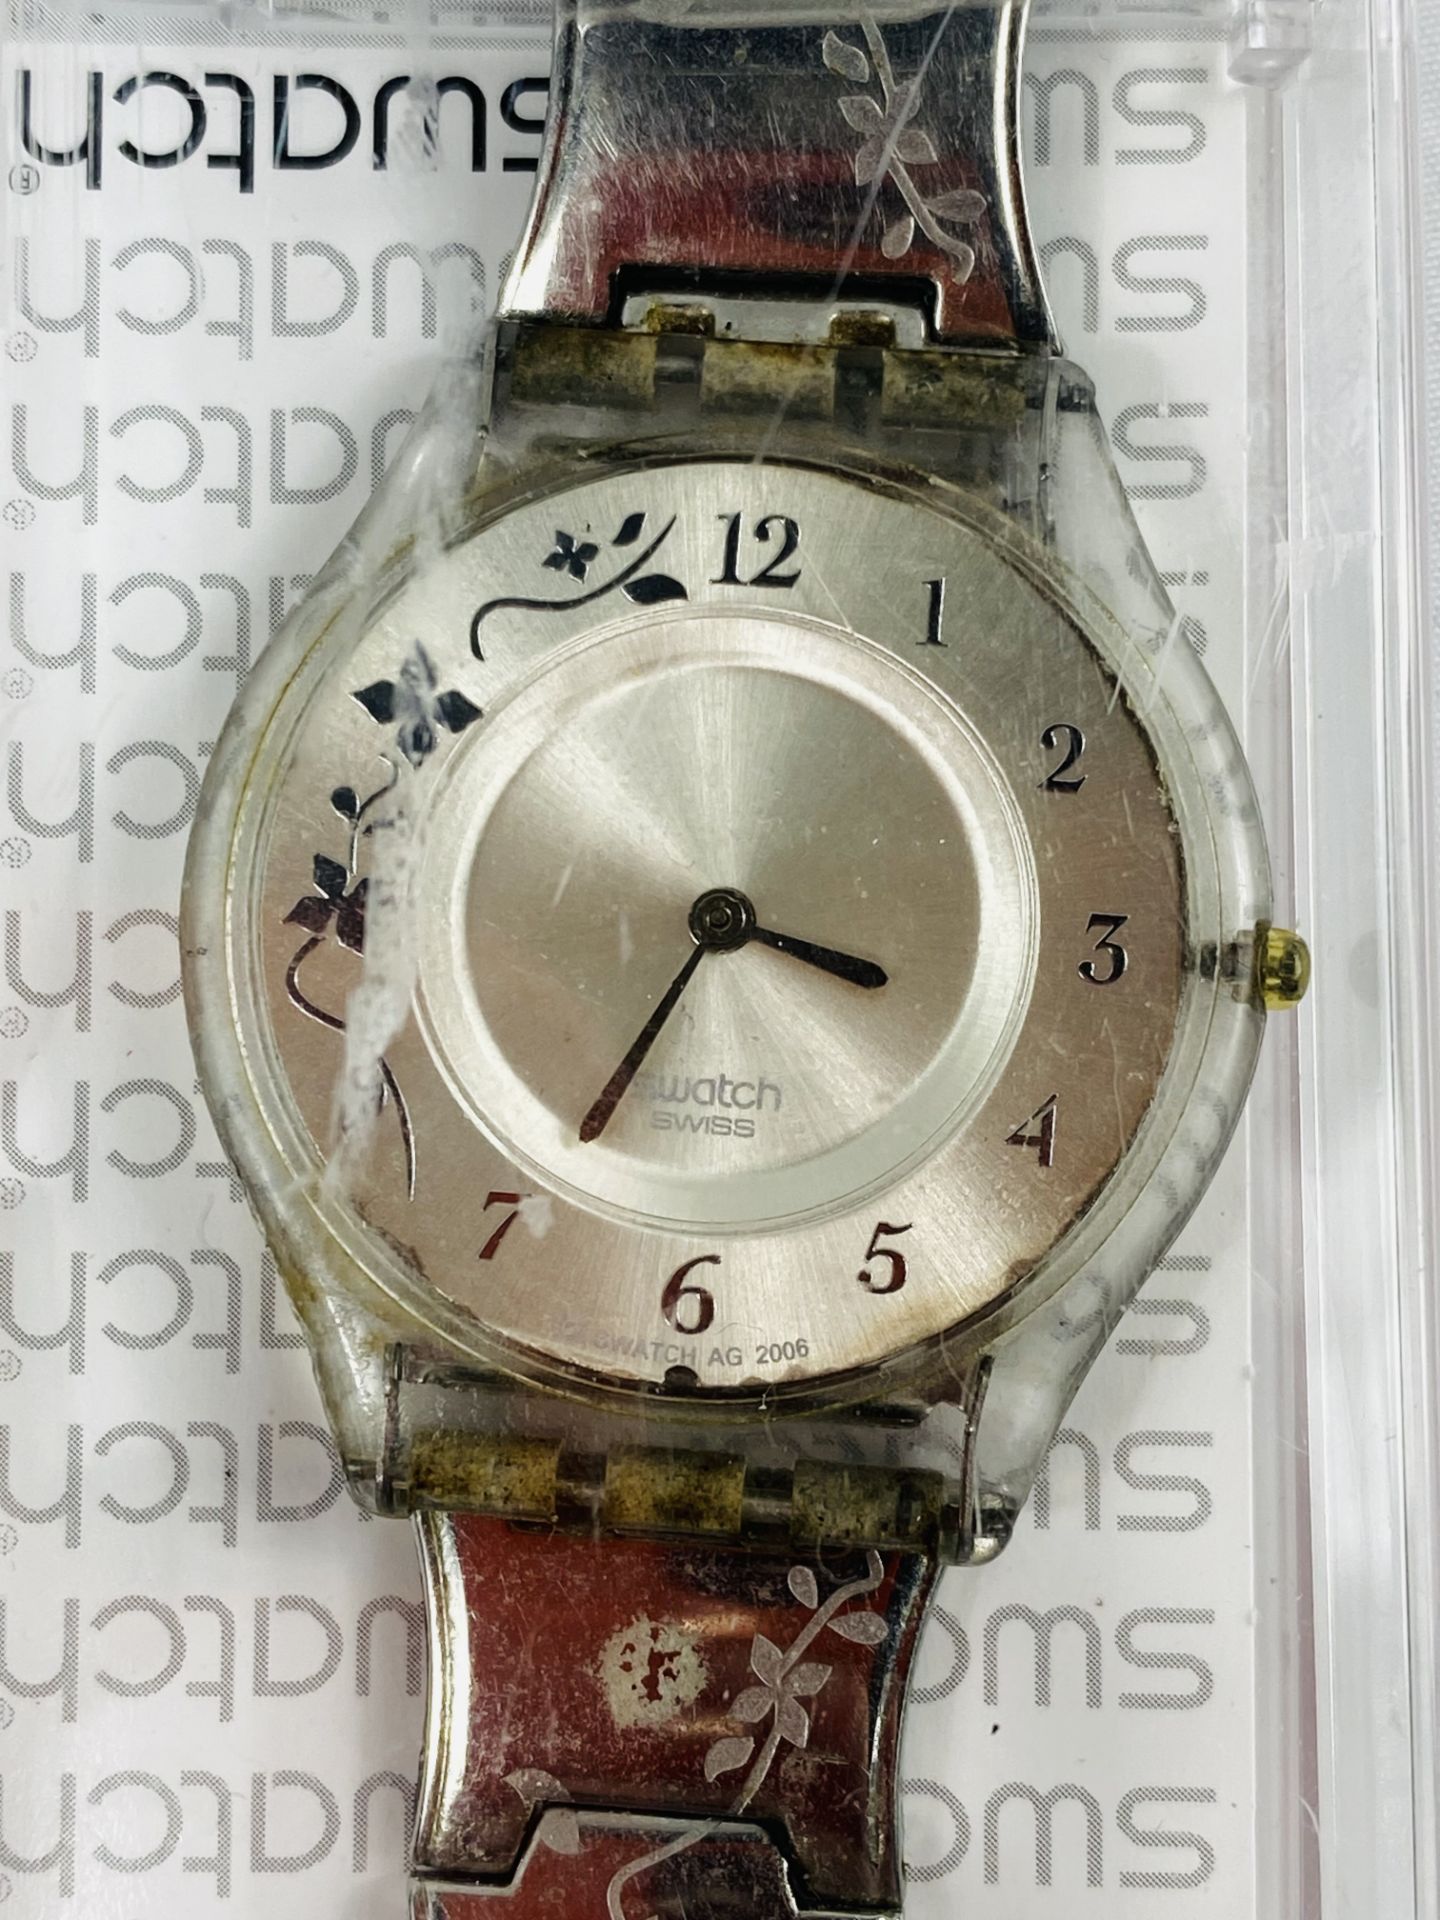 Eleven Swatch watches - Image 12 of 12